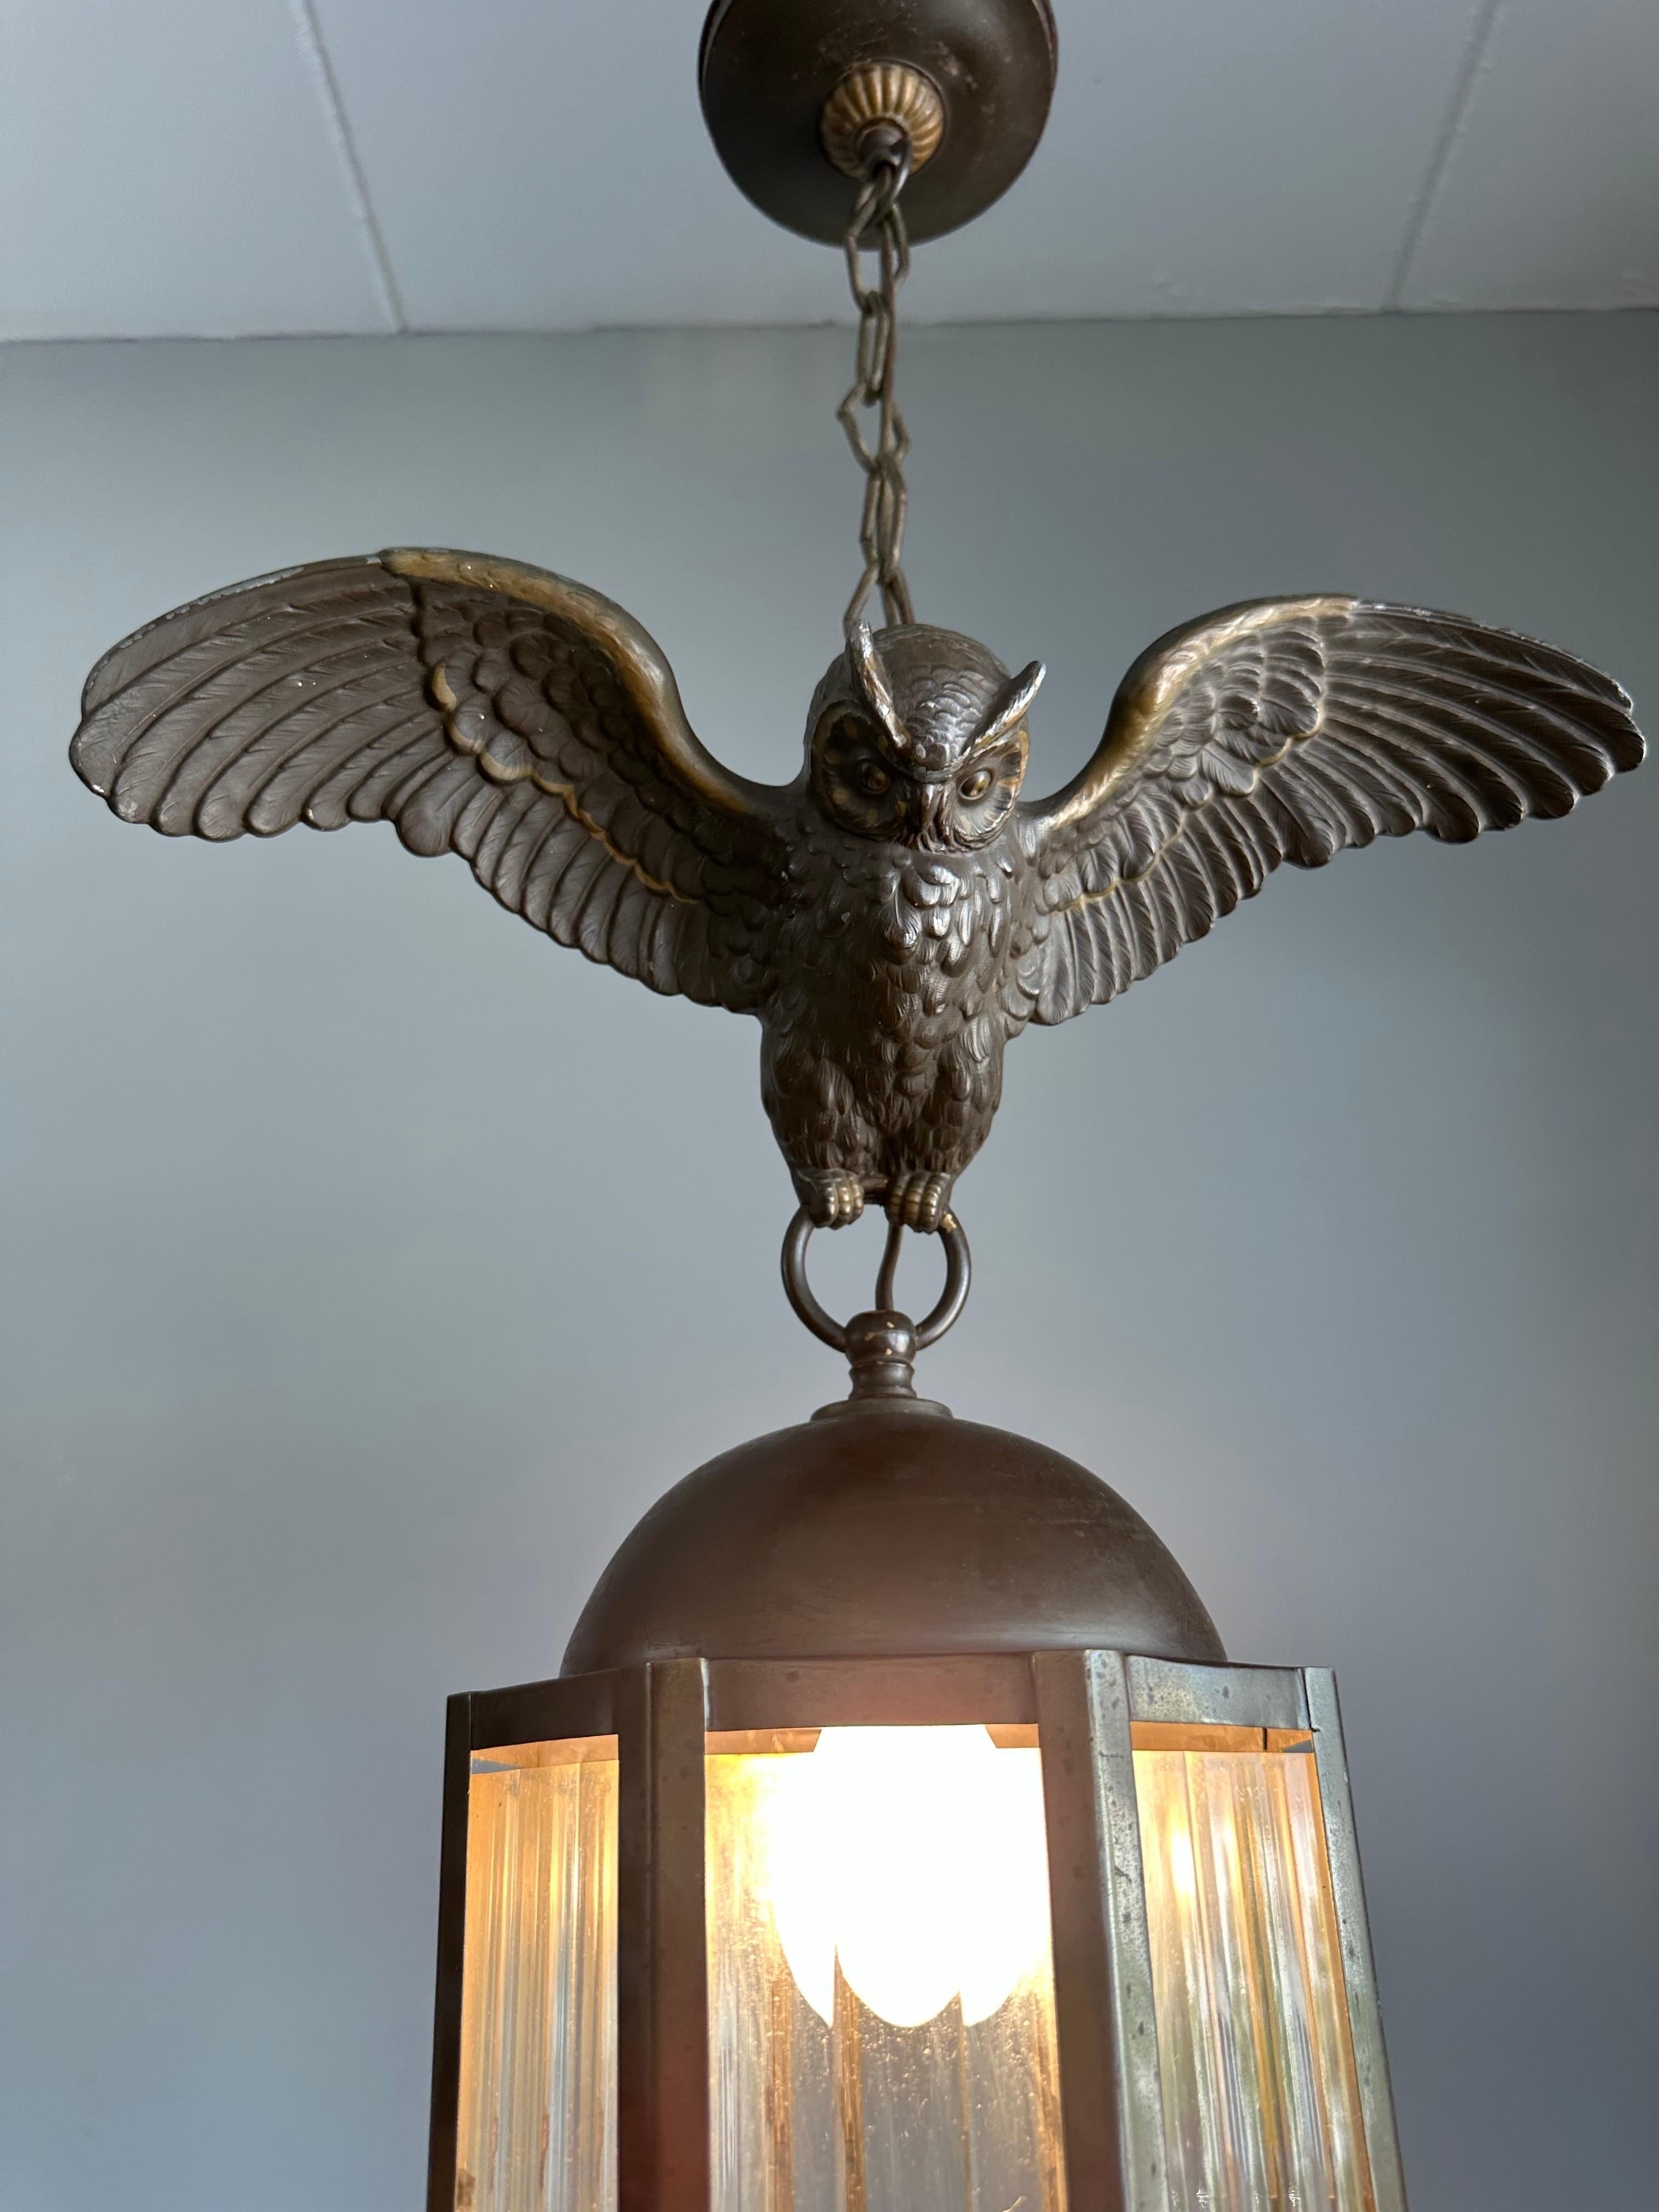 Arts and Crafts Era Flying Owl Sculpture Pendant Light or Lantern with Cut Glass For Sale 5